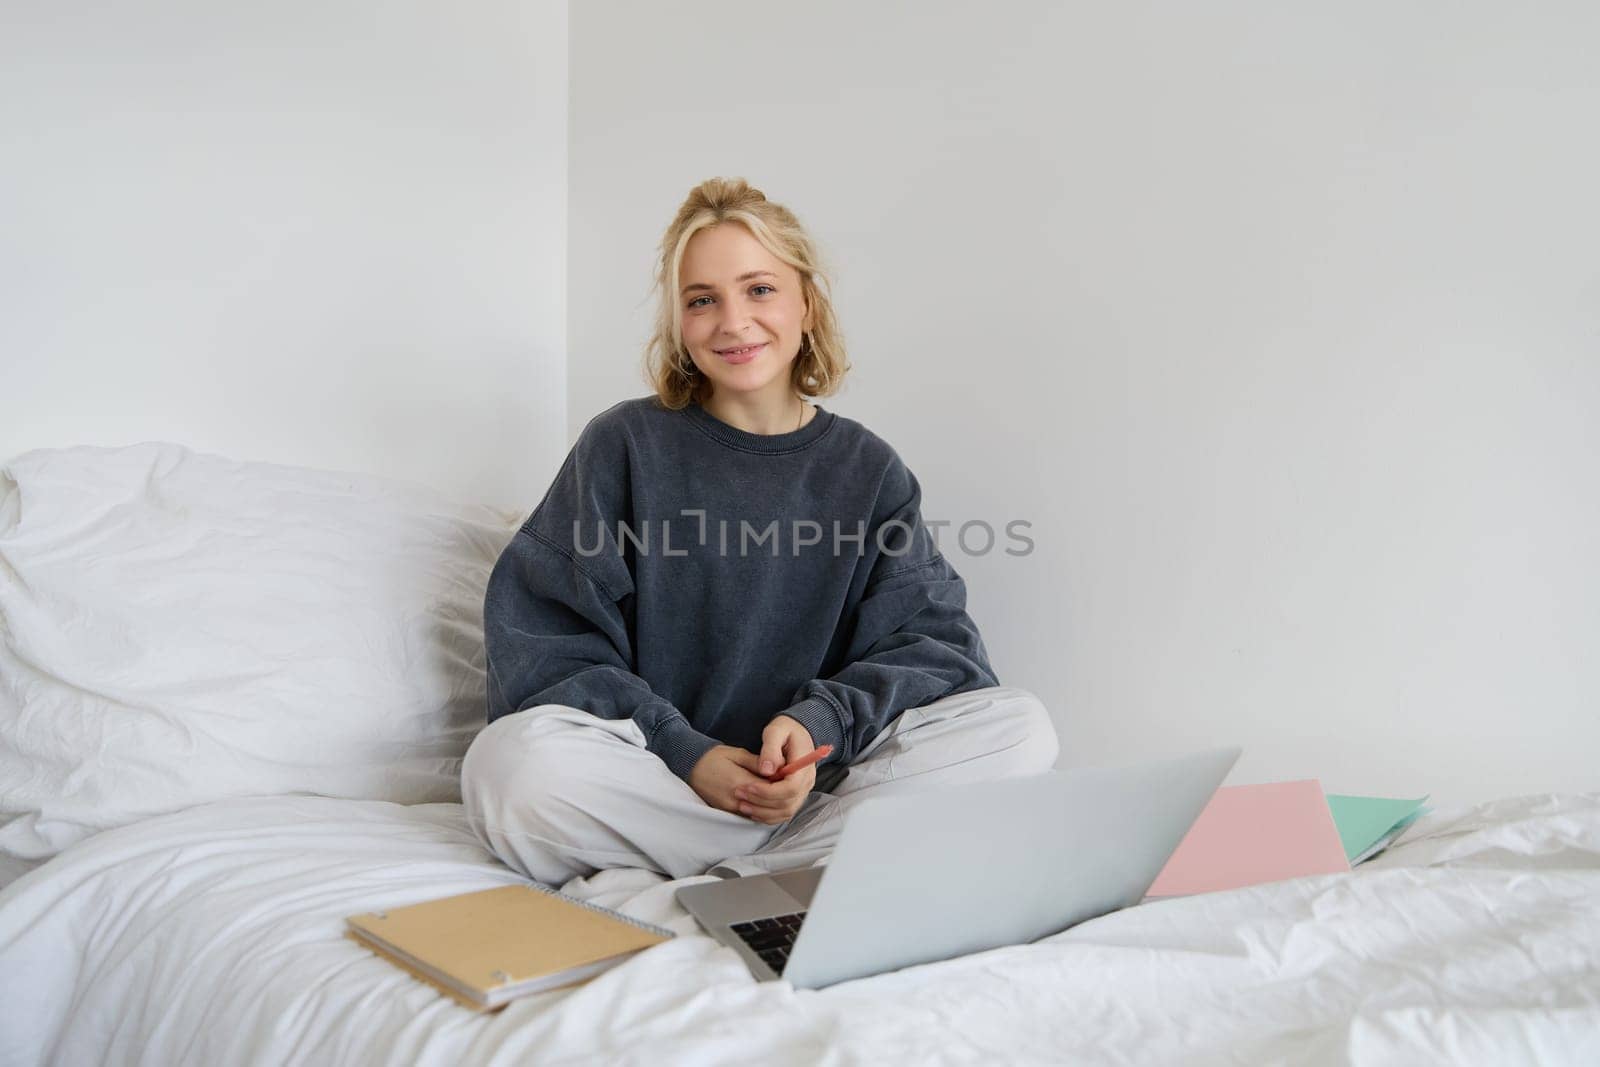 Portrait of female student, woman sits on bed with laptop and notebooks, studying online, remote education concept. Girl freelancer working from her bedroom.